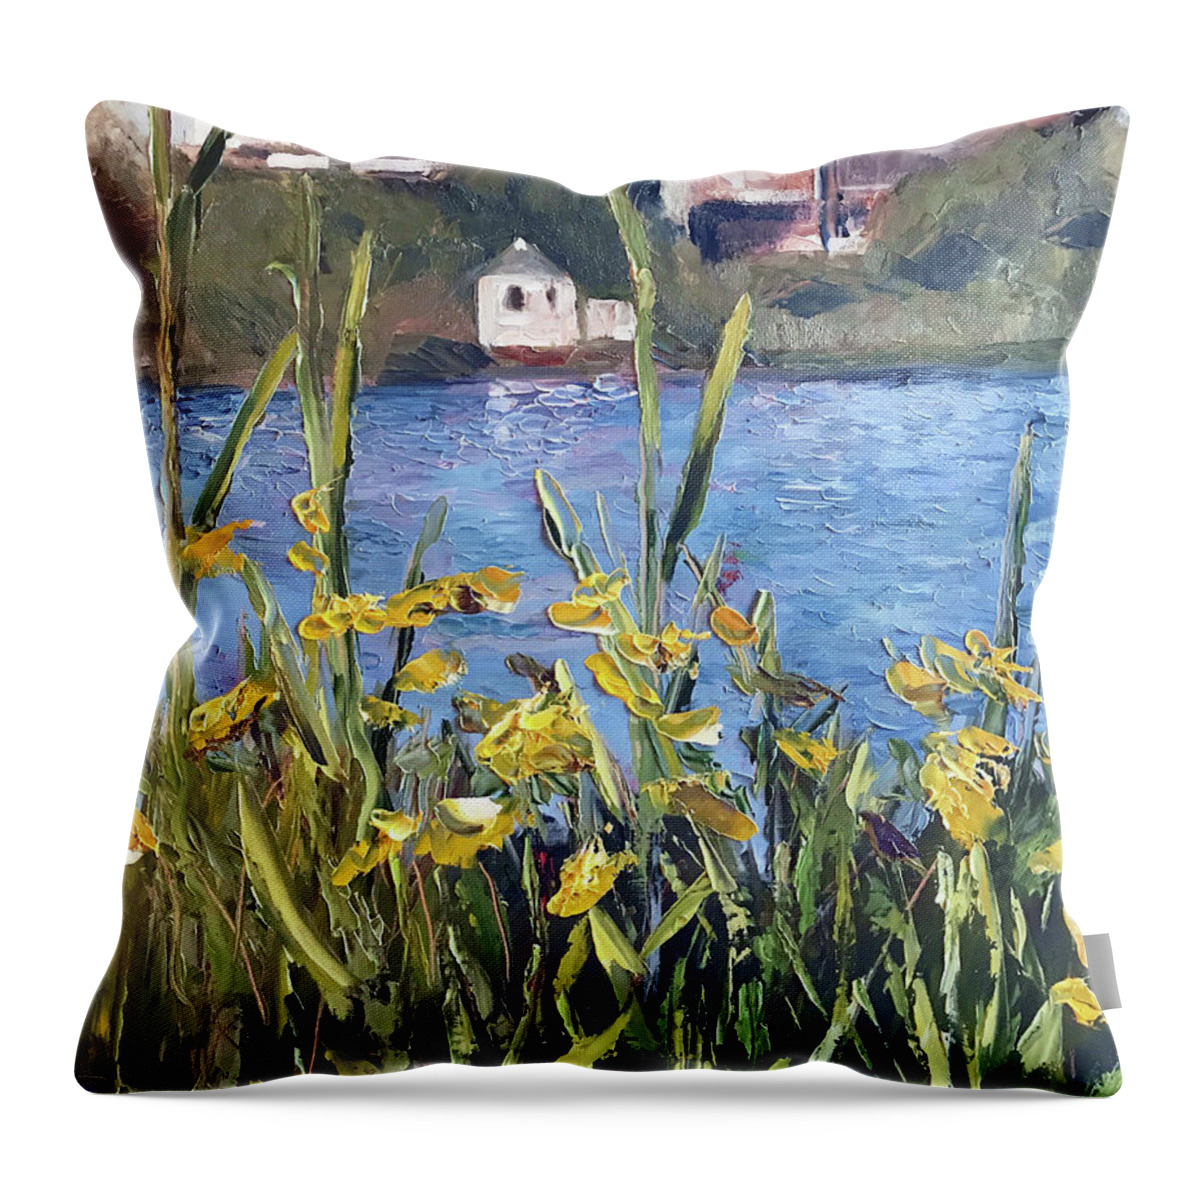 The Artist Josef Throw Pillow featuring the painting Silver Lake Blossoms by Josef Kelly